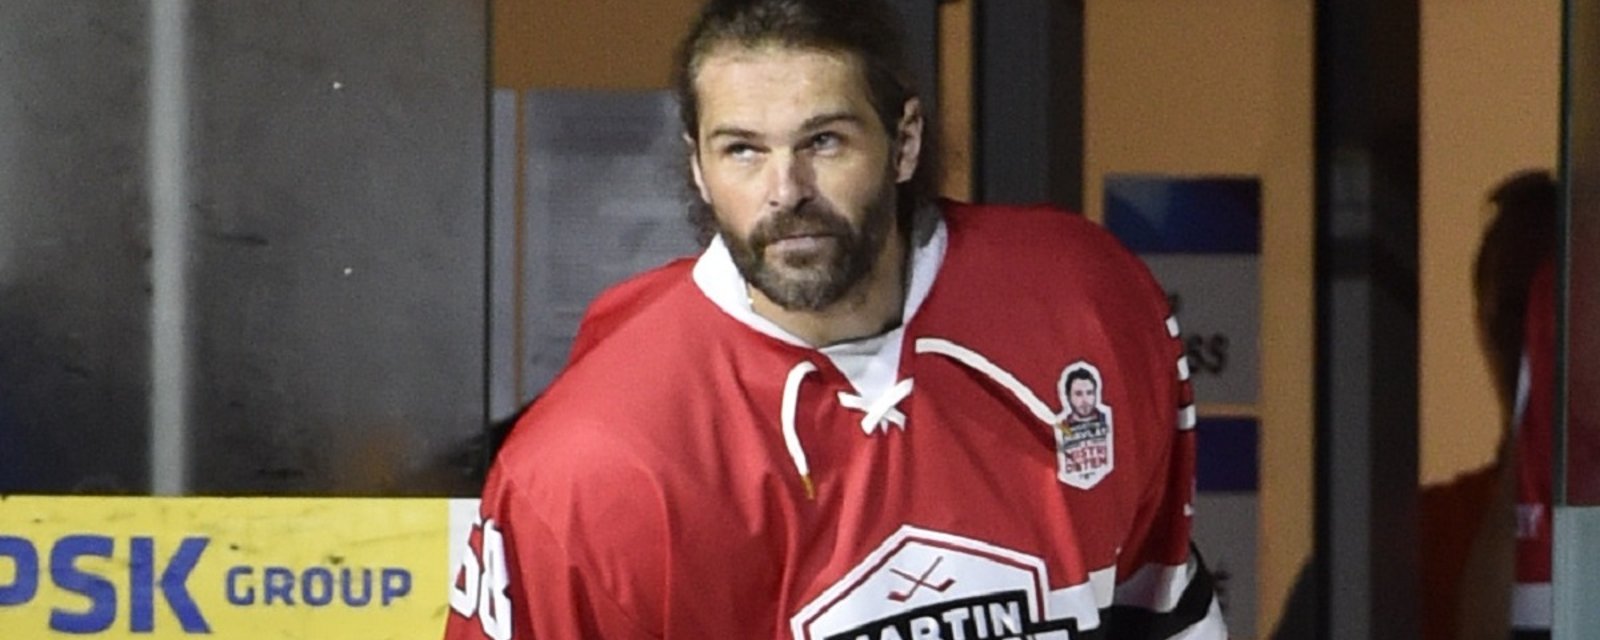 Breaking: Jagr wears a Flames jersey for the first time, signs one-year deal.